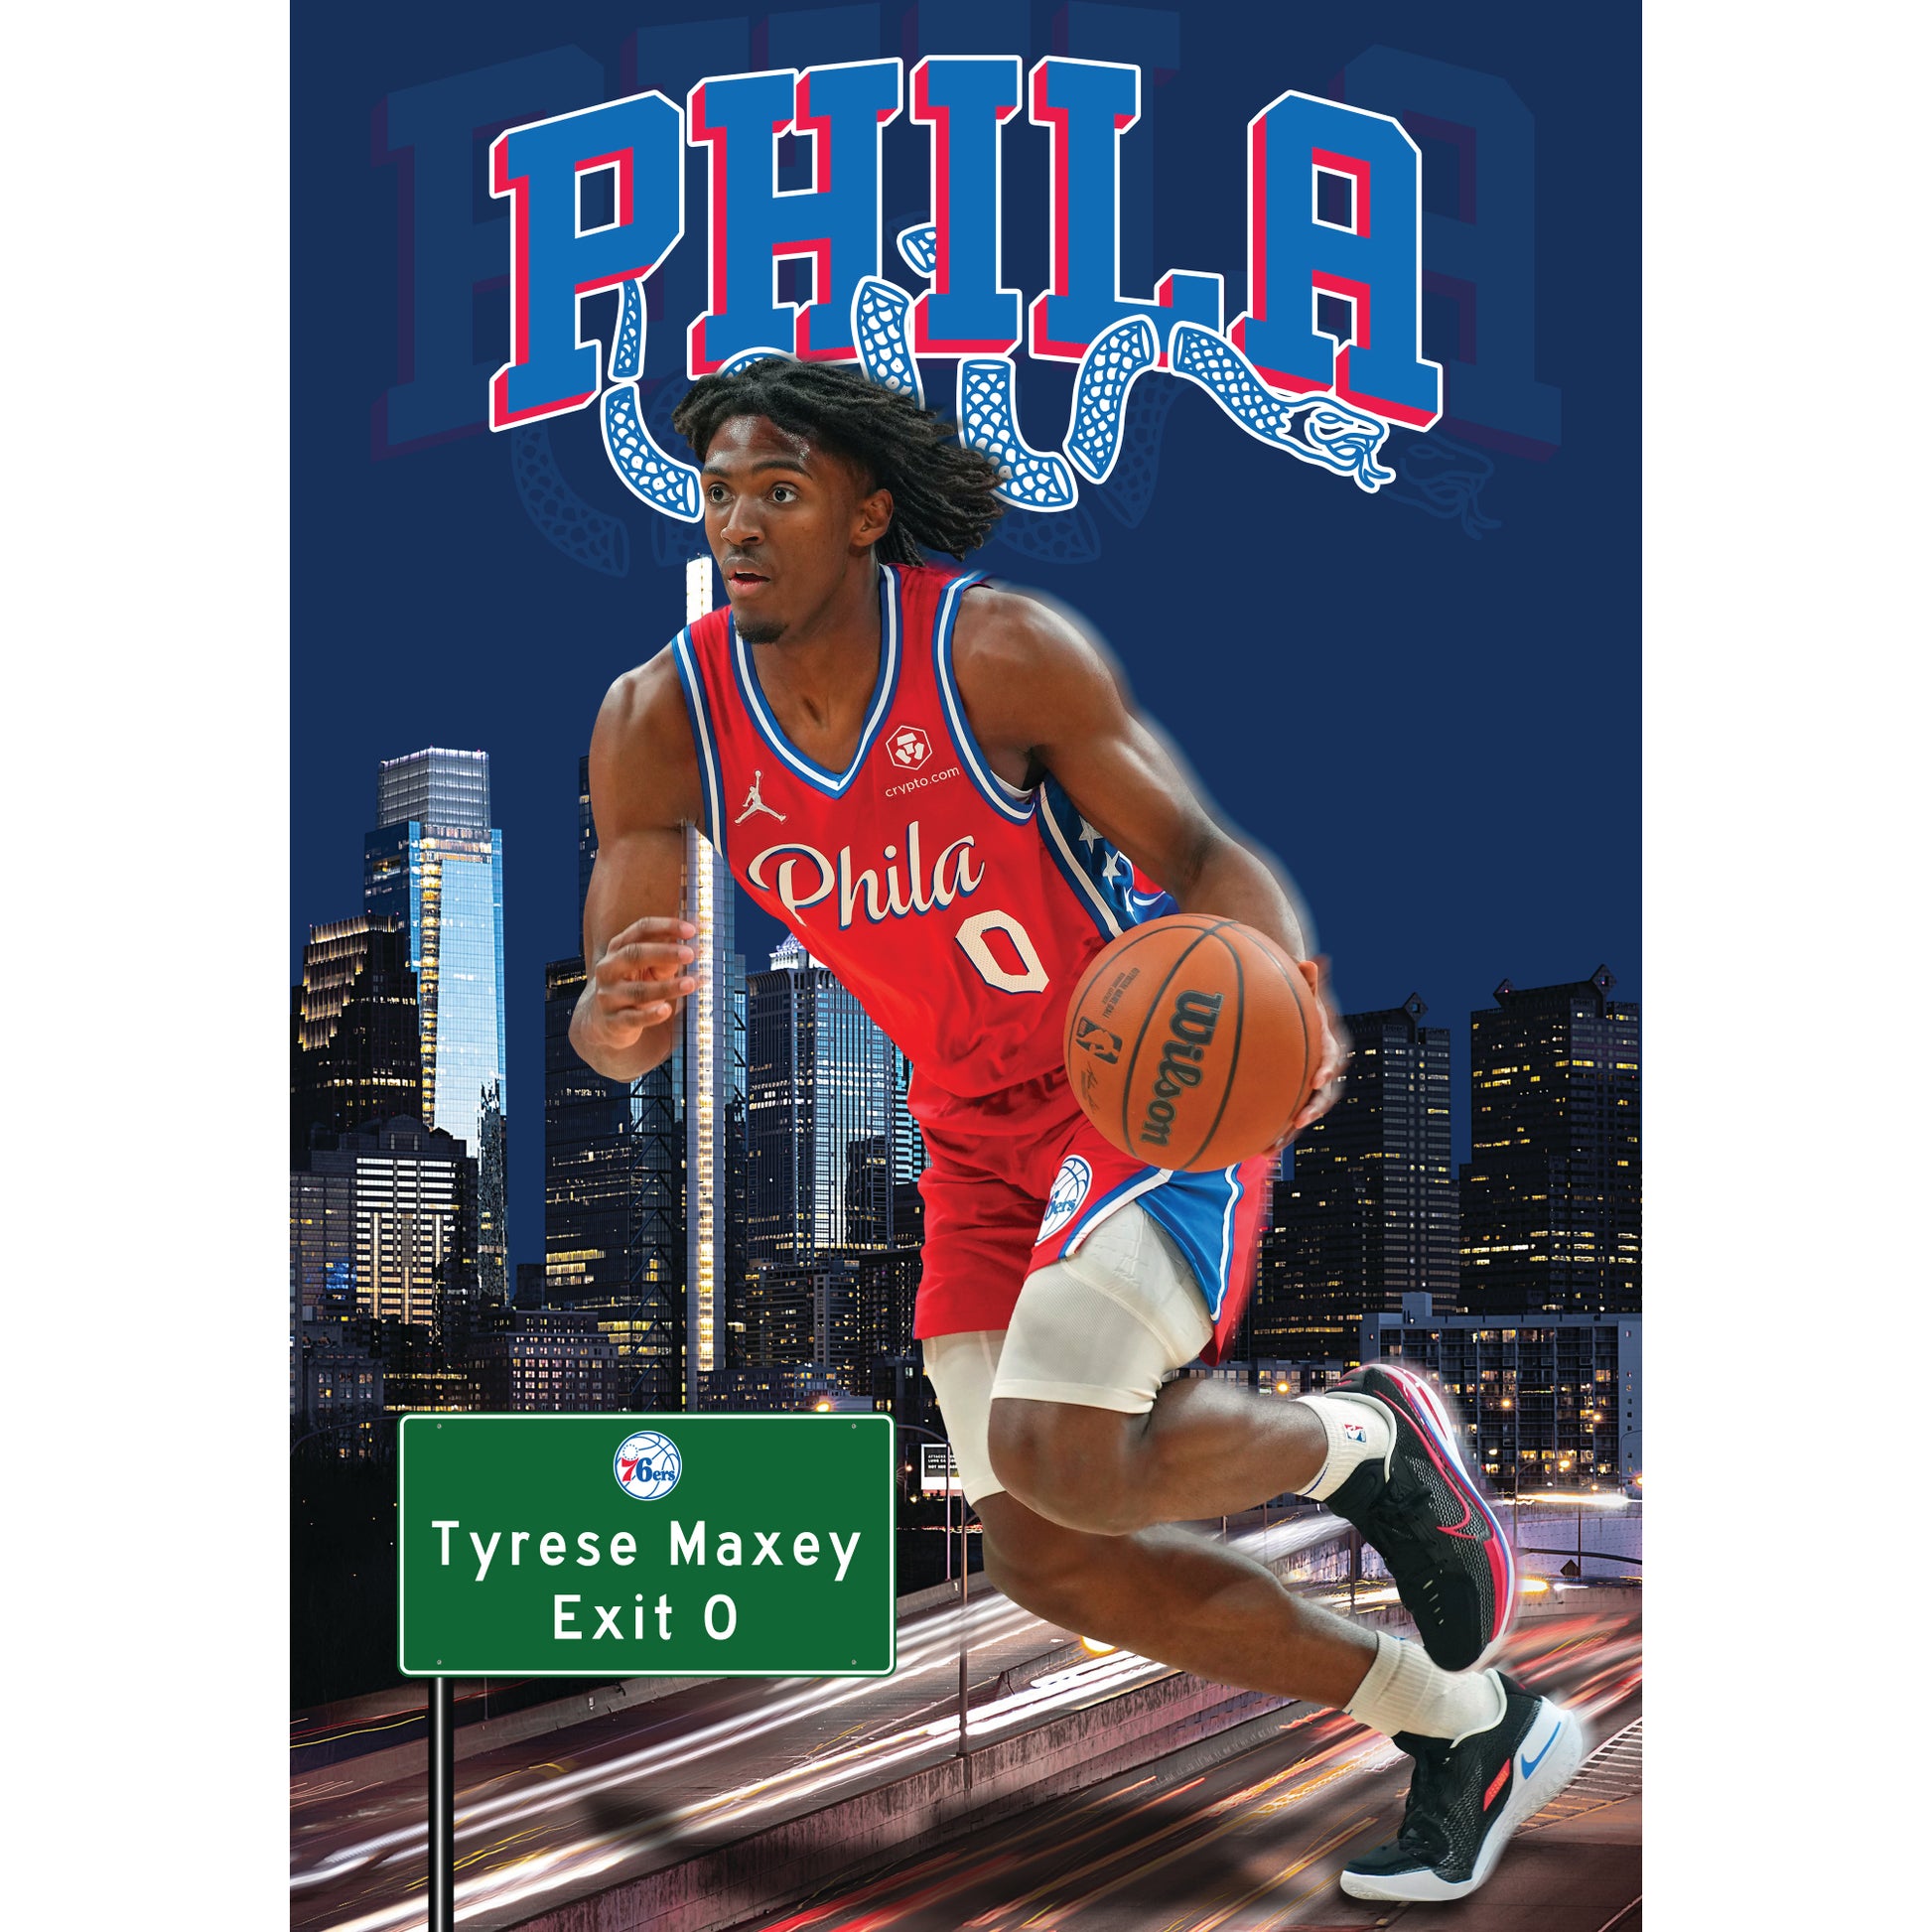 Philadelphia 76ers: Tyrese Maxey Artistic Poster - Officially Licensed